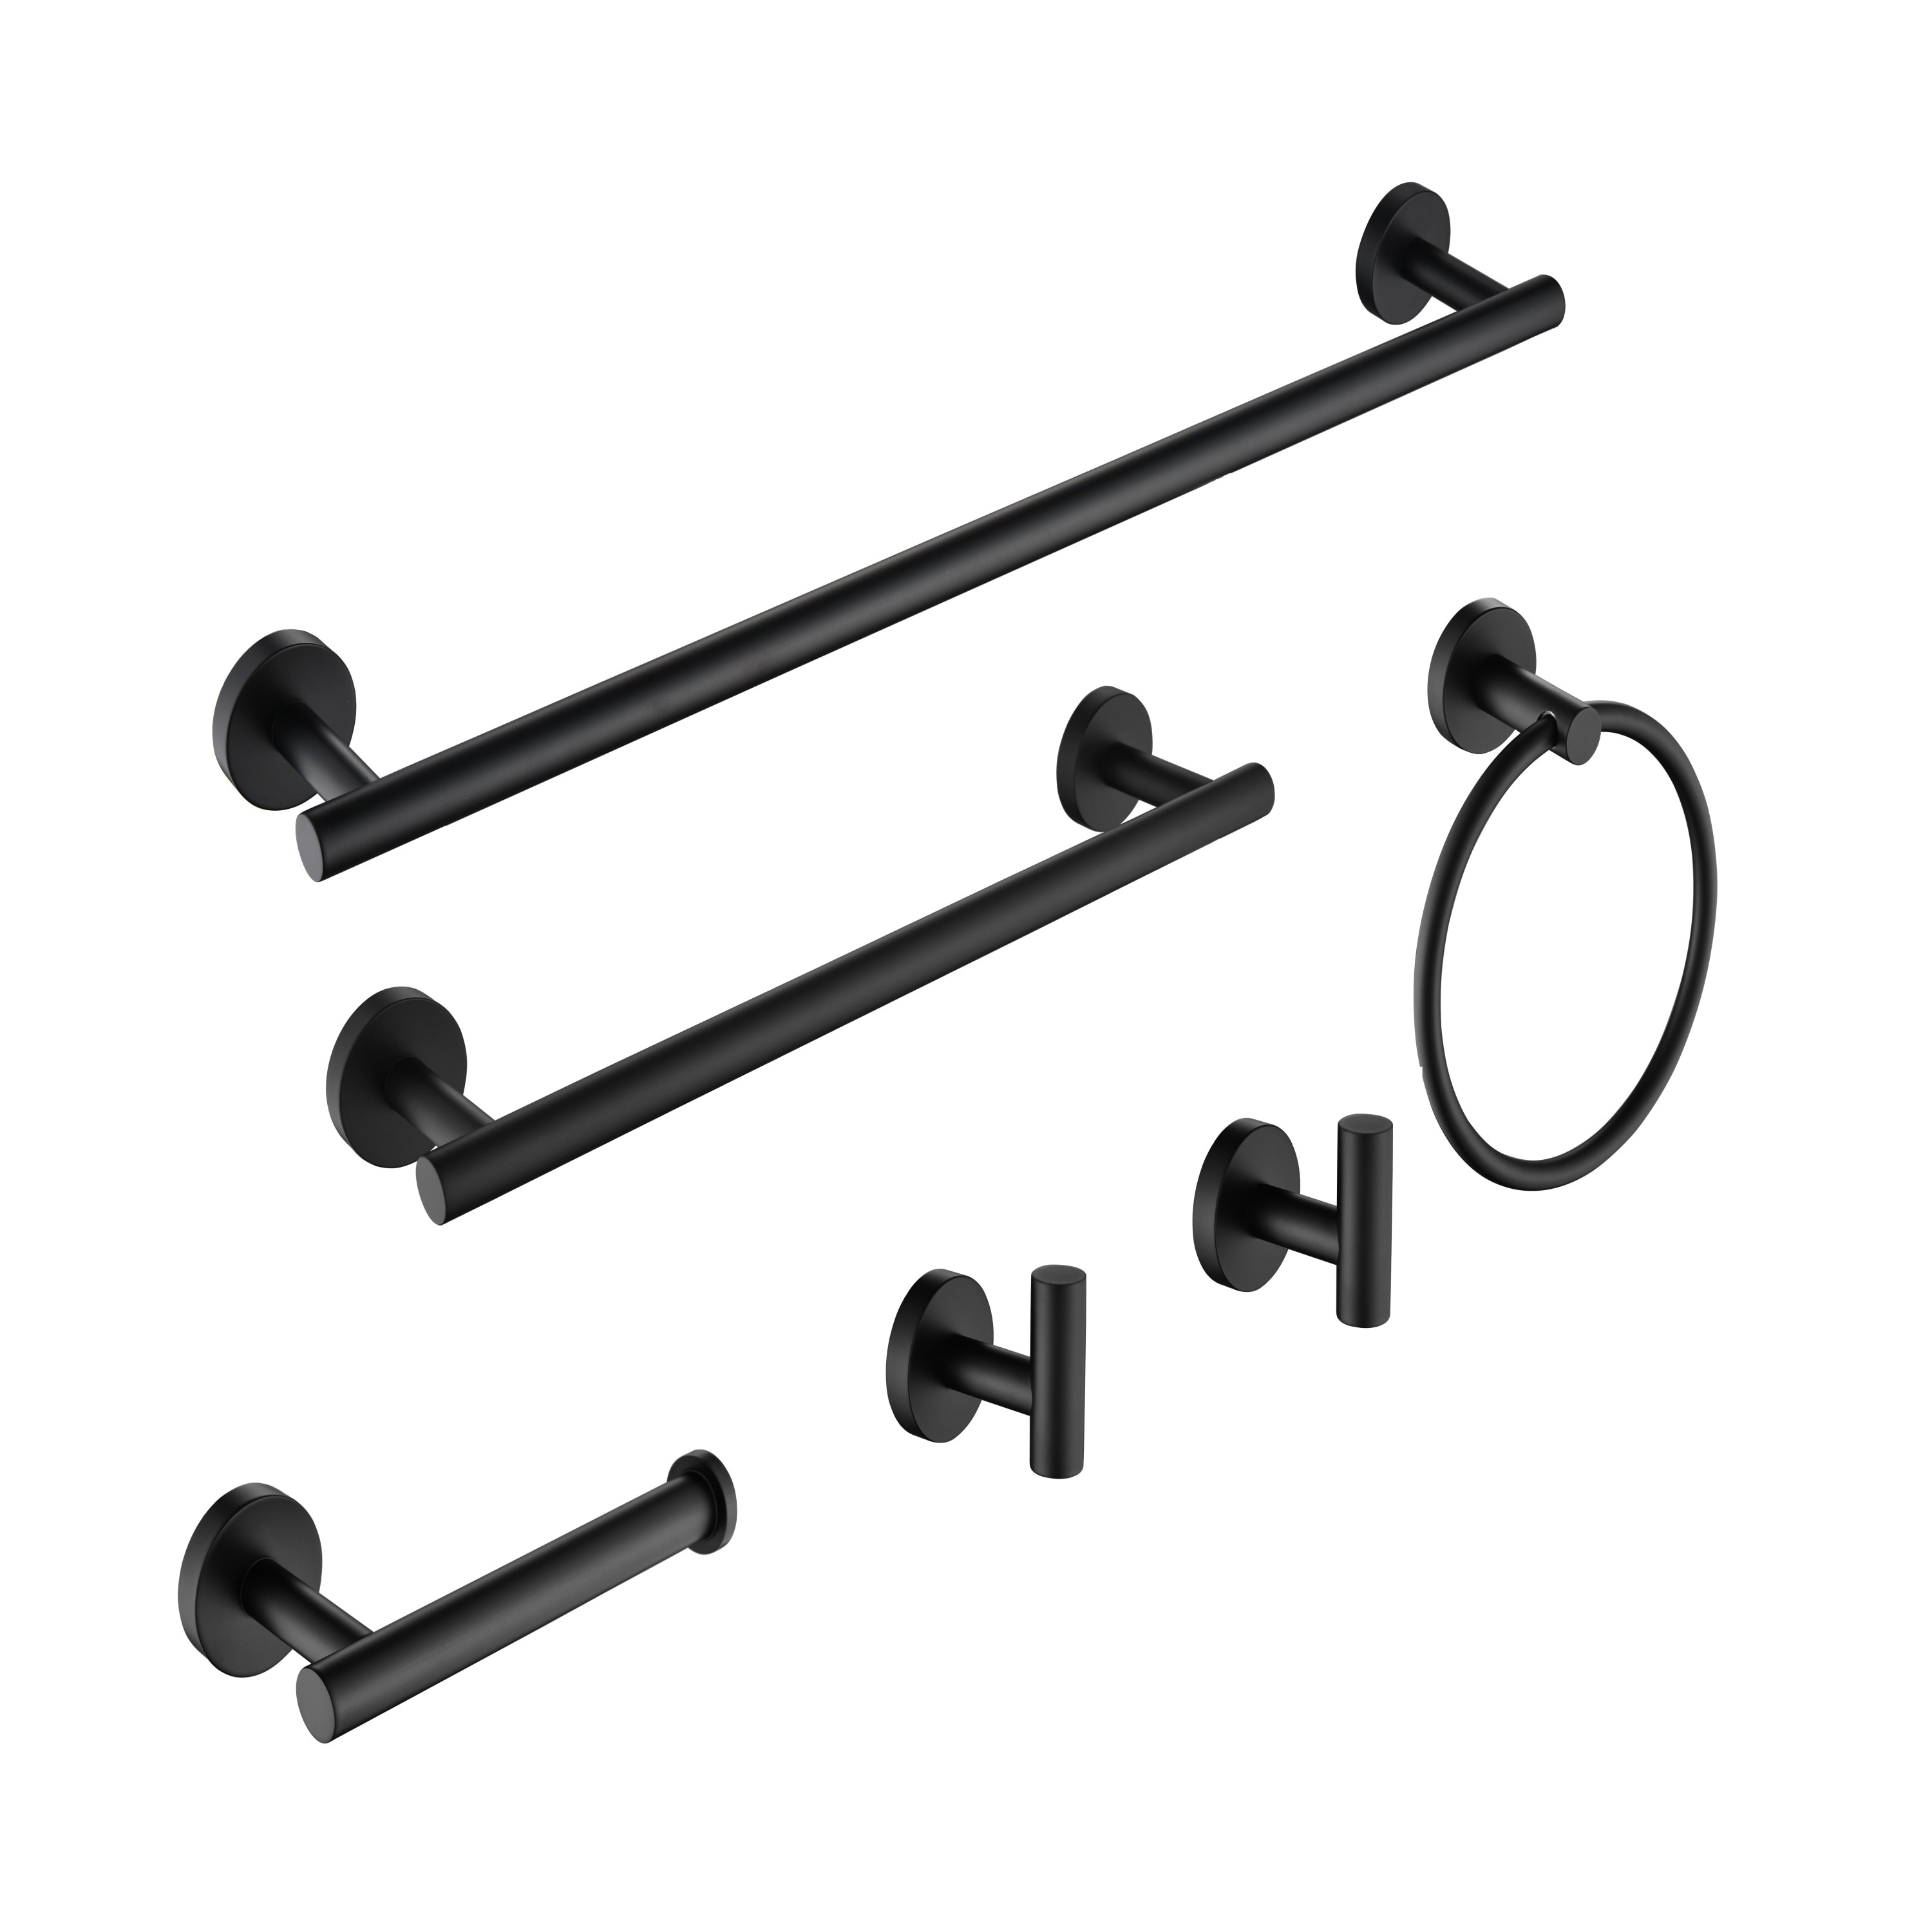 https://ak1.ostkcdn.com/images/products/is/images/direct/c08a8752bf00dc068451c669e36a0965c15cb966/6-Piece-Stainless-Steel-Bathroom-Towel-Rack-Set-Wall-Mount-Furniture.jpg